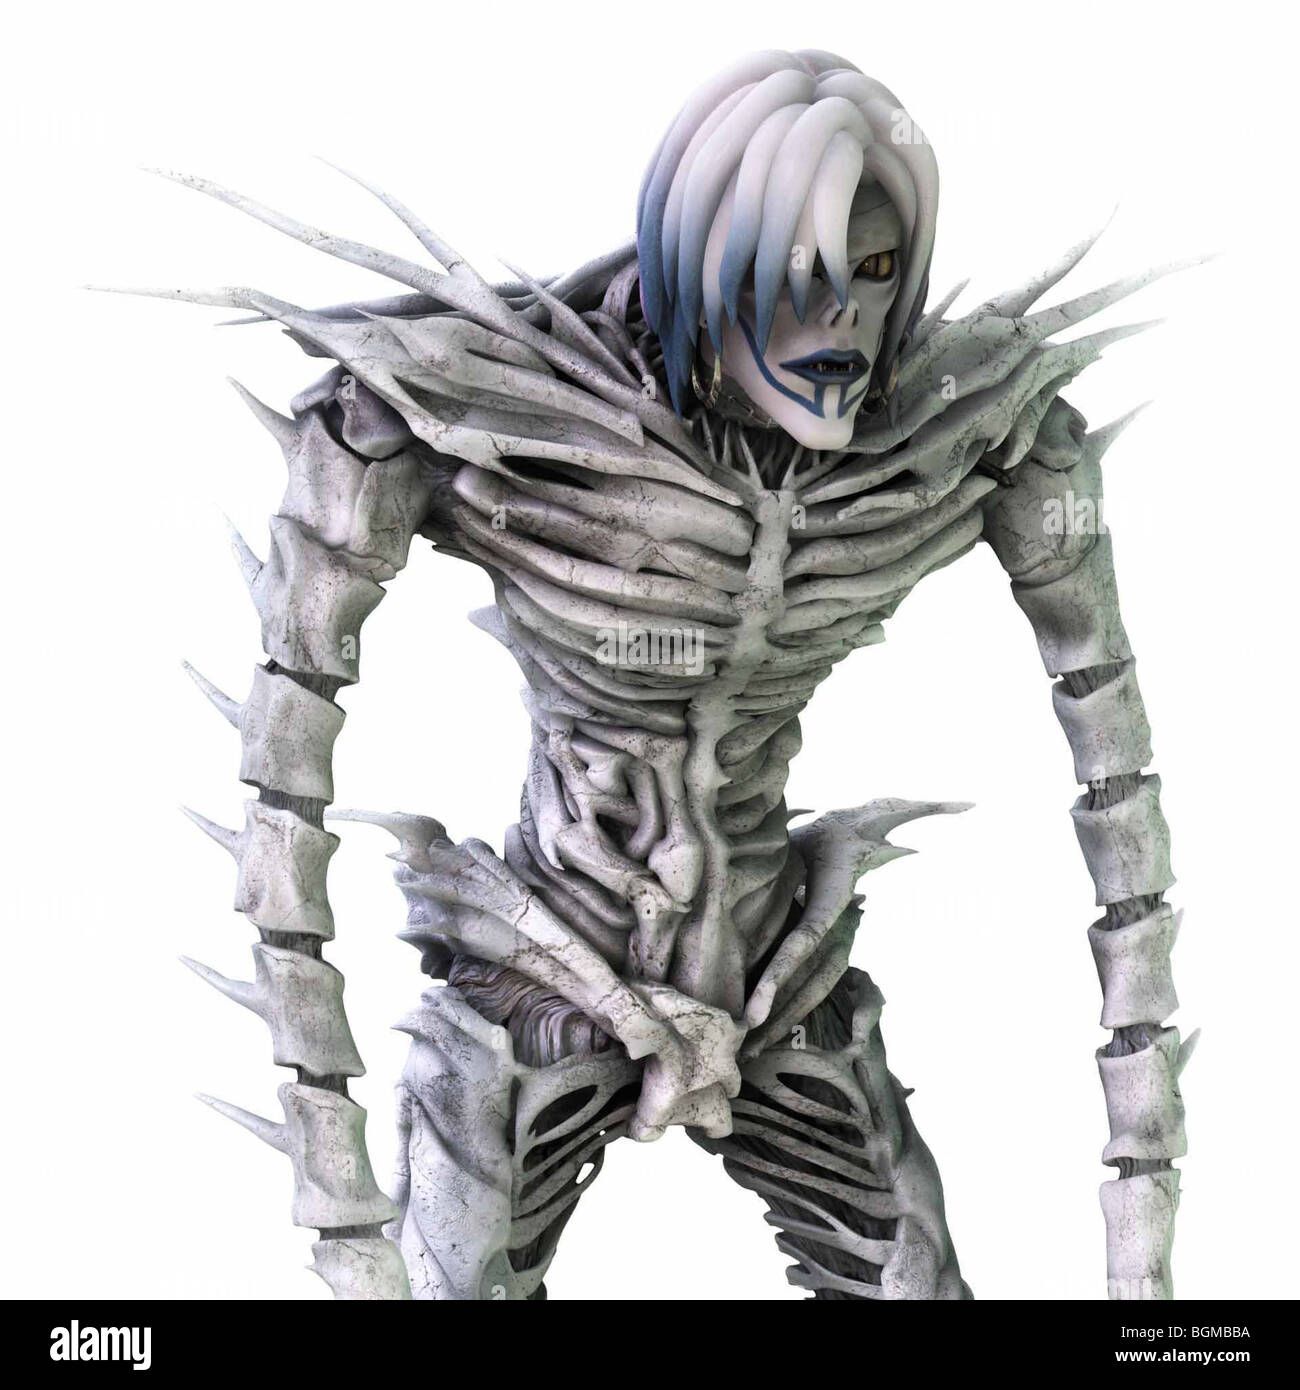 Death Note png images